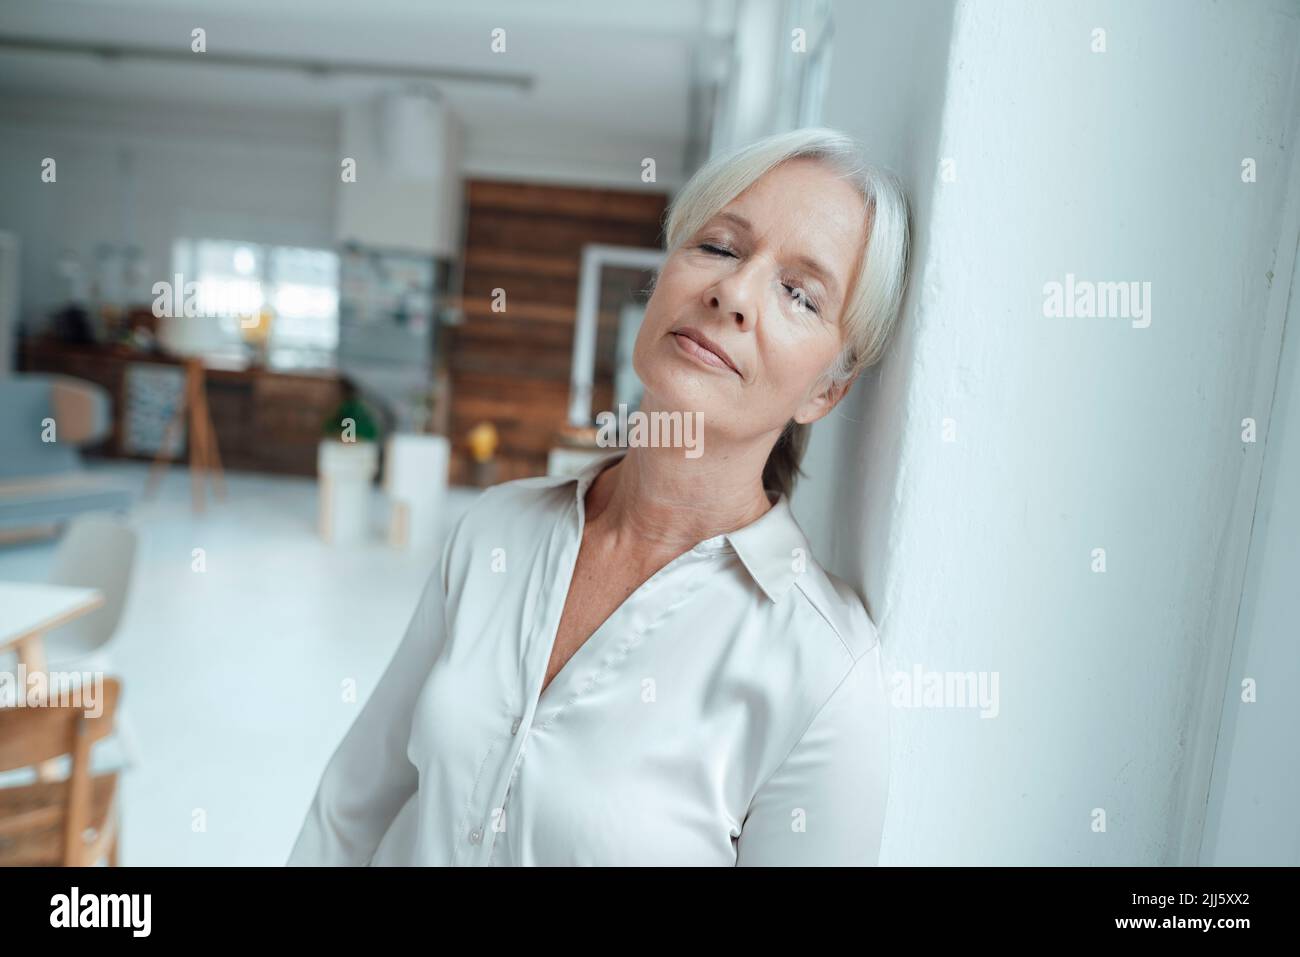 Businesswoman with eyes closed leaning on wall in office Stock Photo